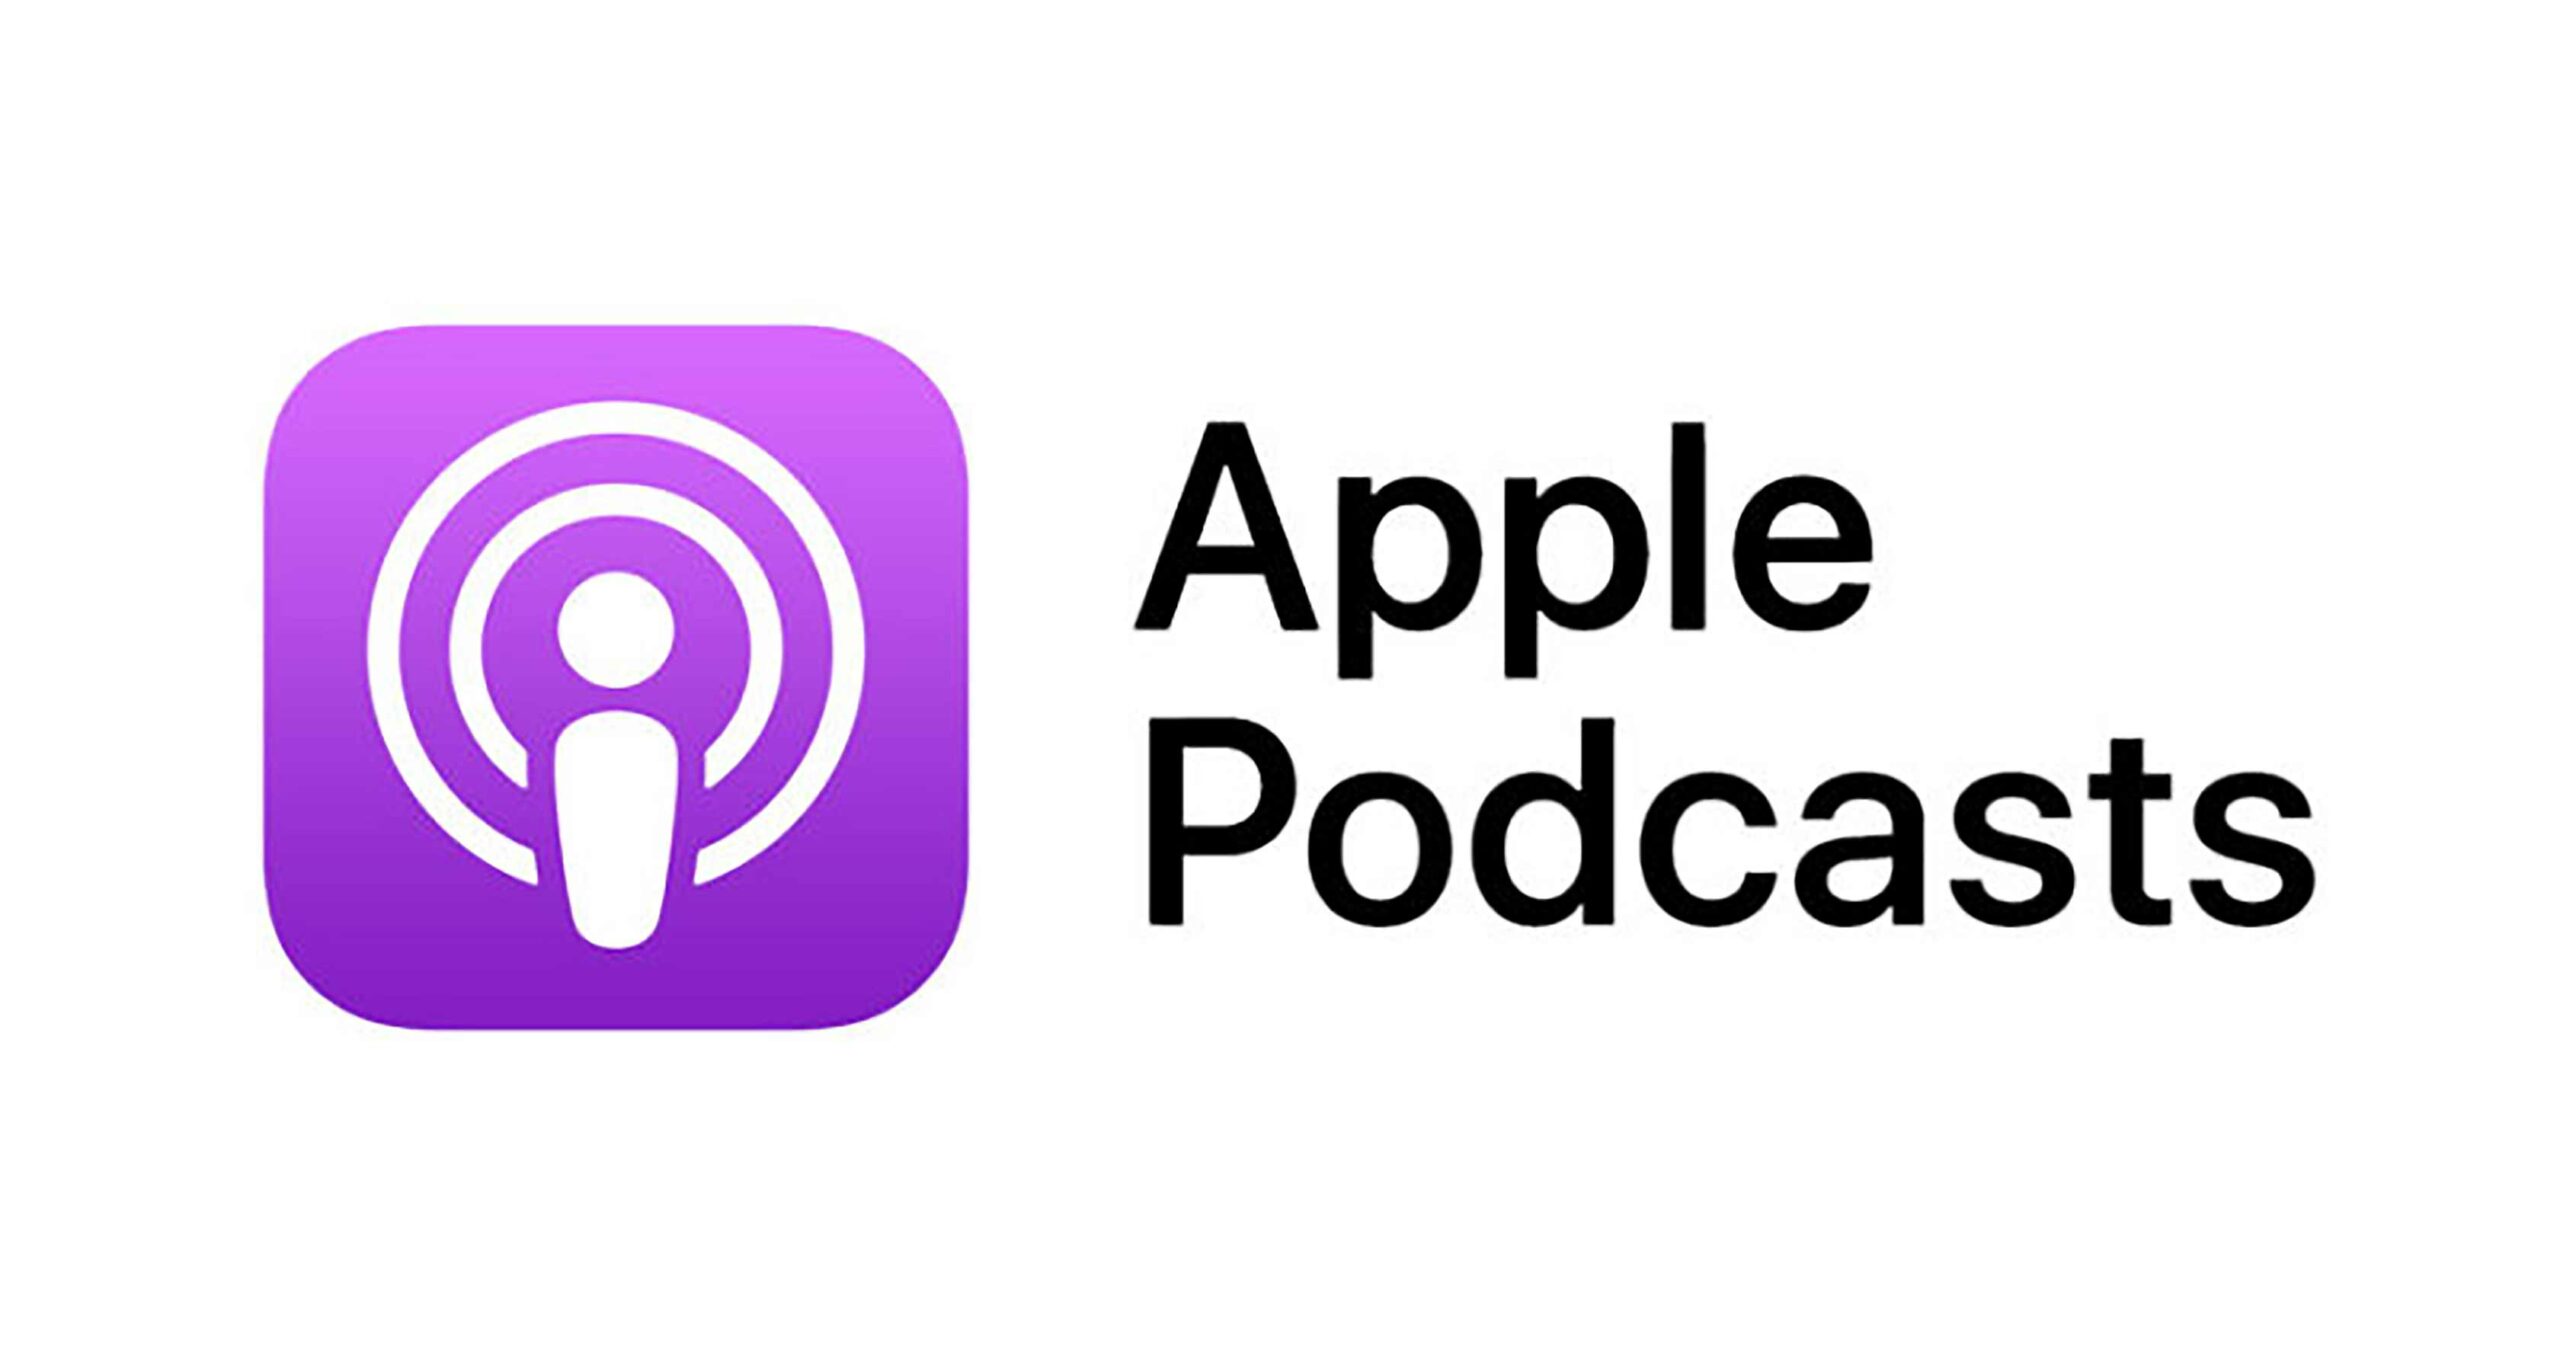 iOS 14 to include revamped Podcasts app with recommendations, extras: rumour